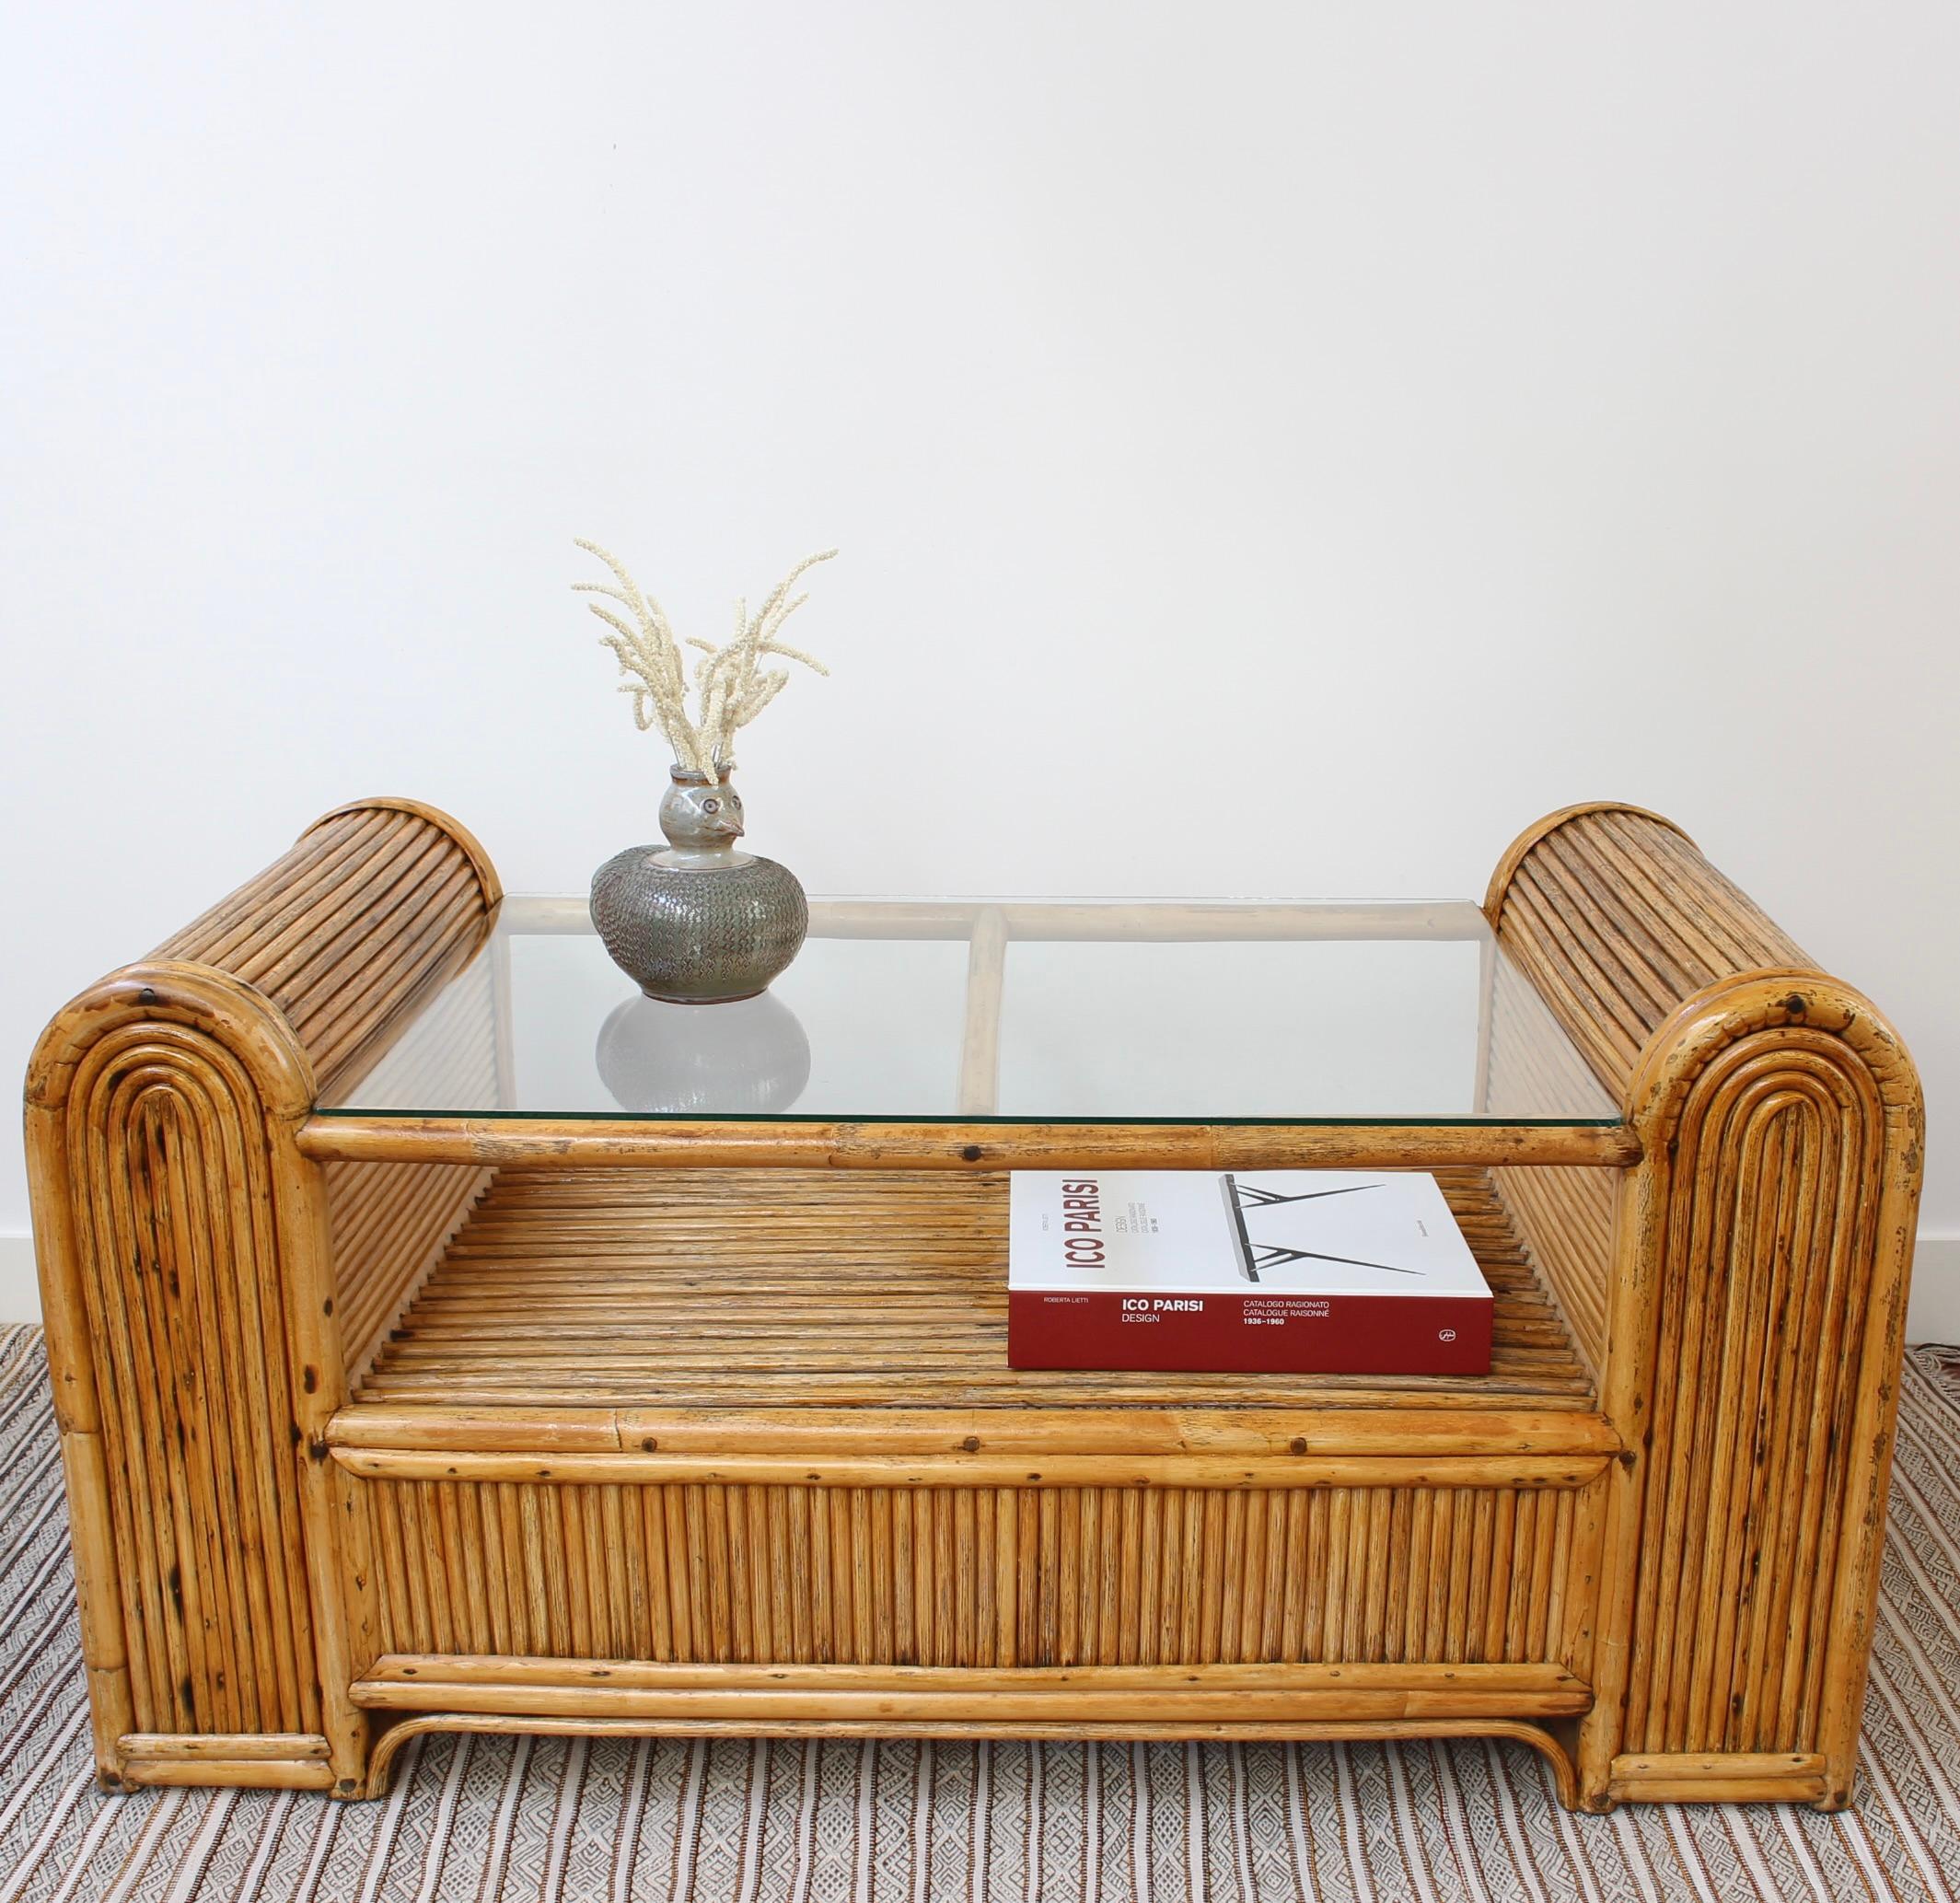 Italian vintage 'Chubby' style rattan coffee table (circa 1970s). A very delightful piece which will cheer up any room. Discovered in Italy, it has all the charm of that era. Part of its real charm as well, however, are the various characterful,